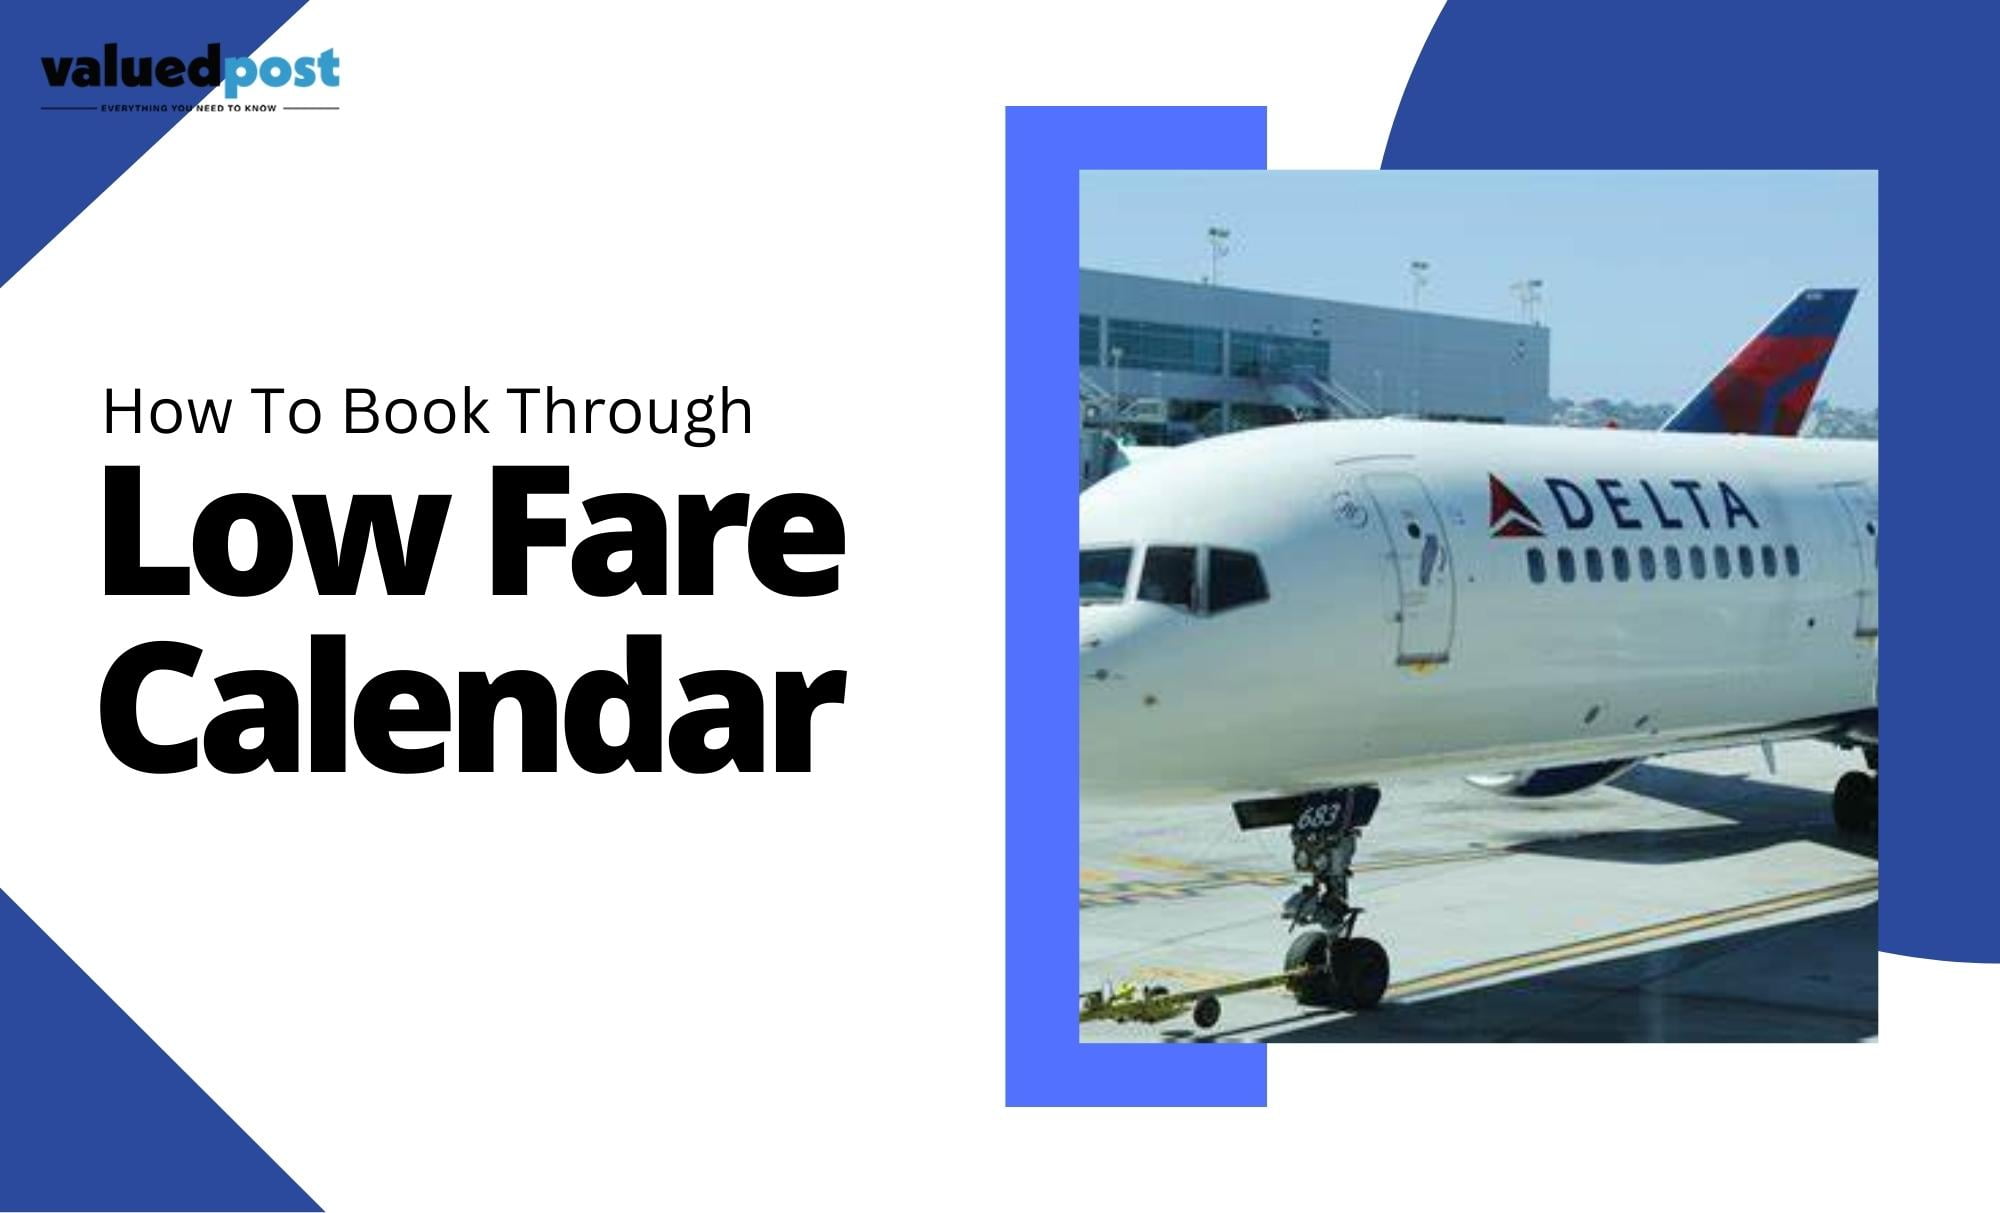 delta-low-fare-calendar-looking-for-the-best-time-to-book